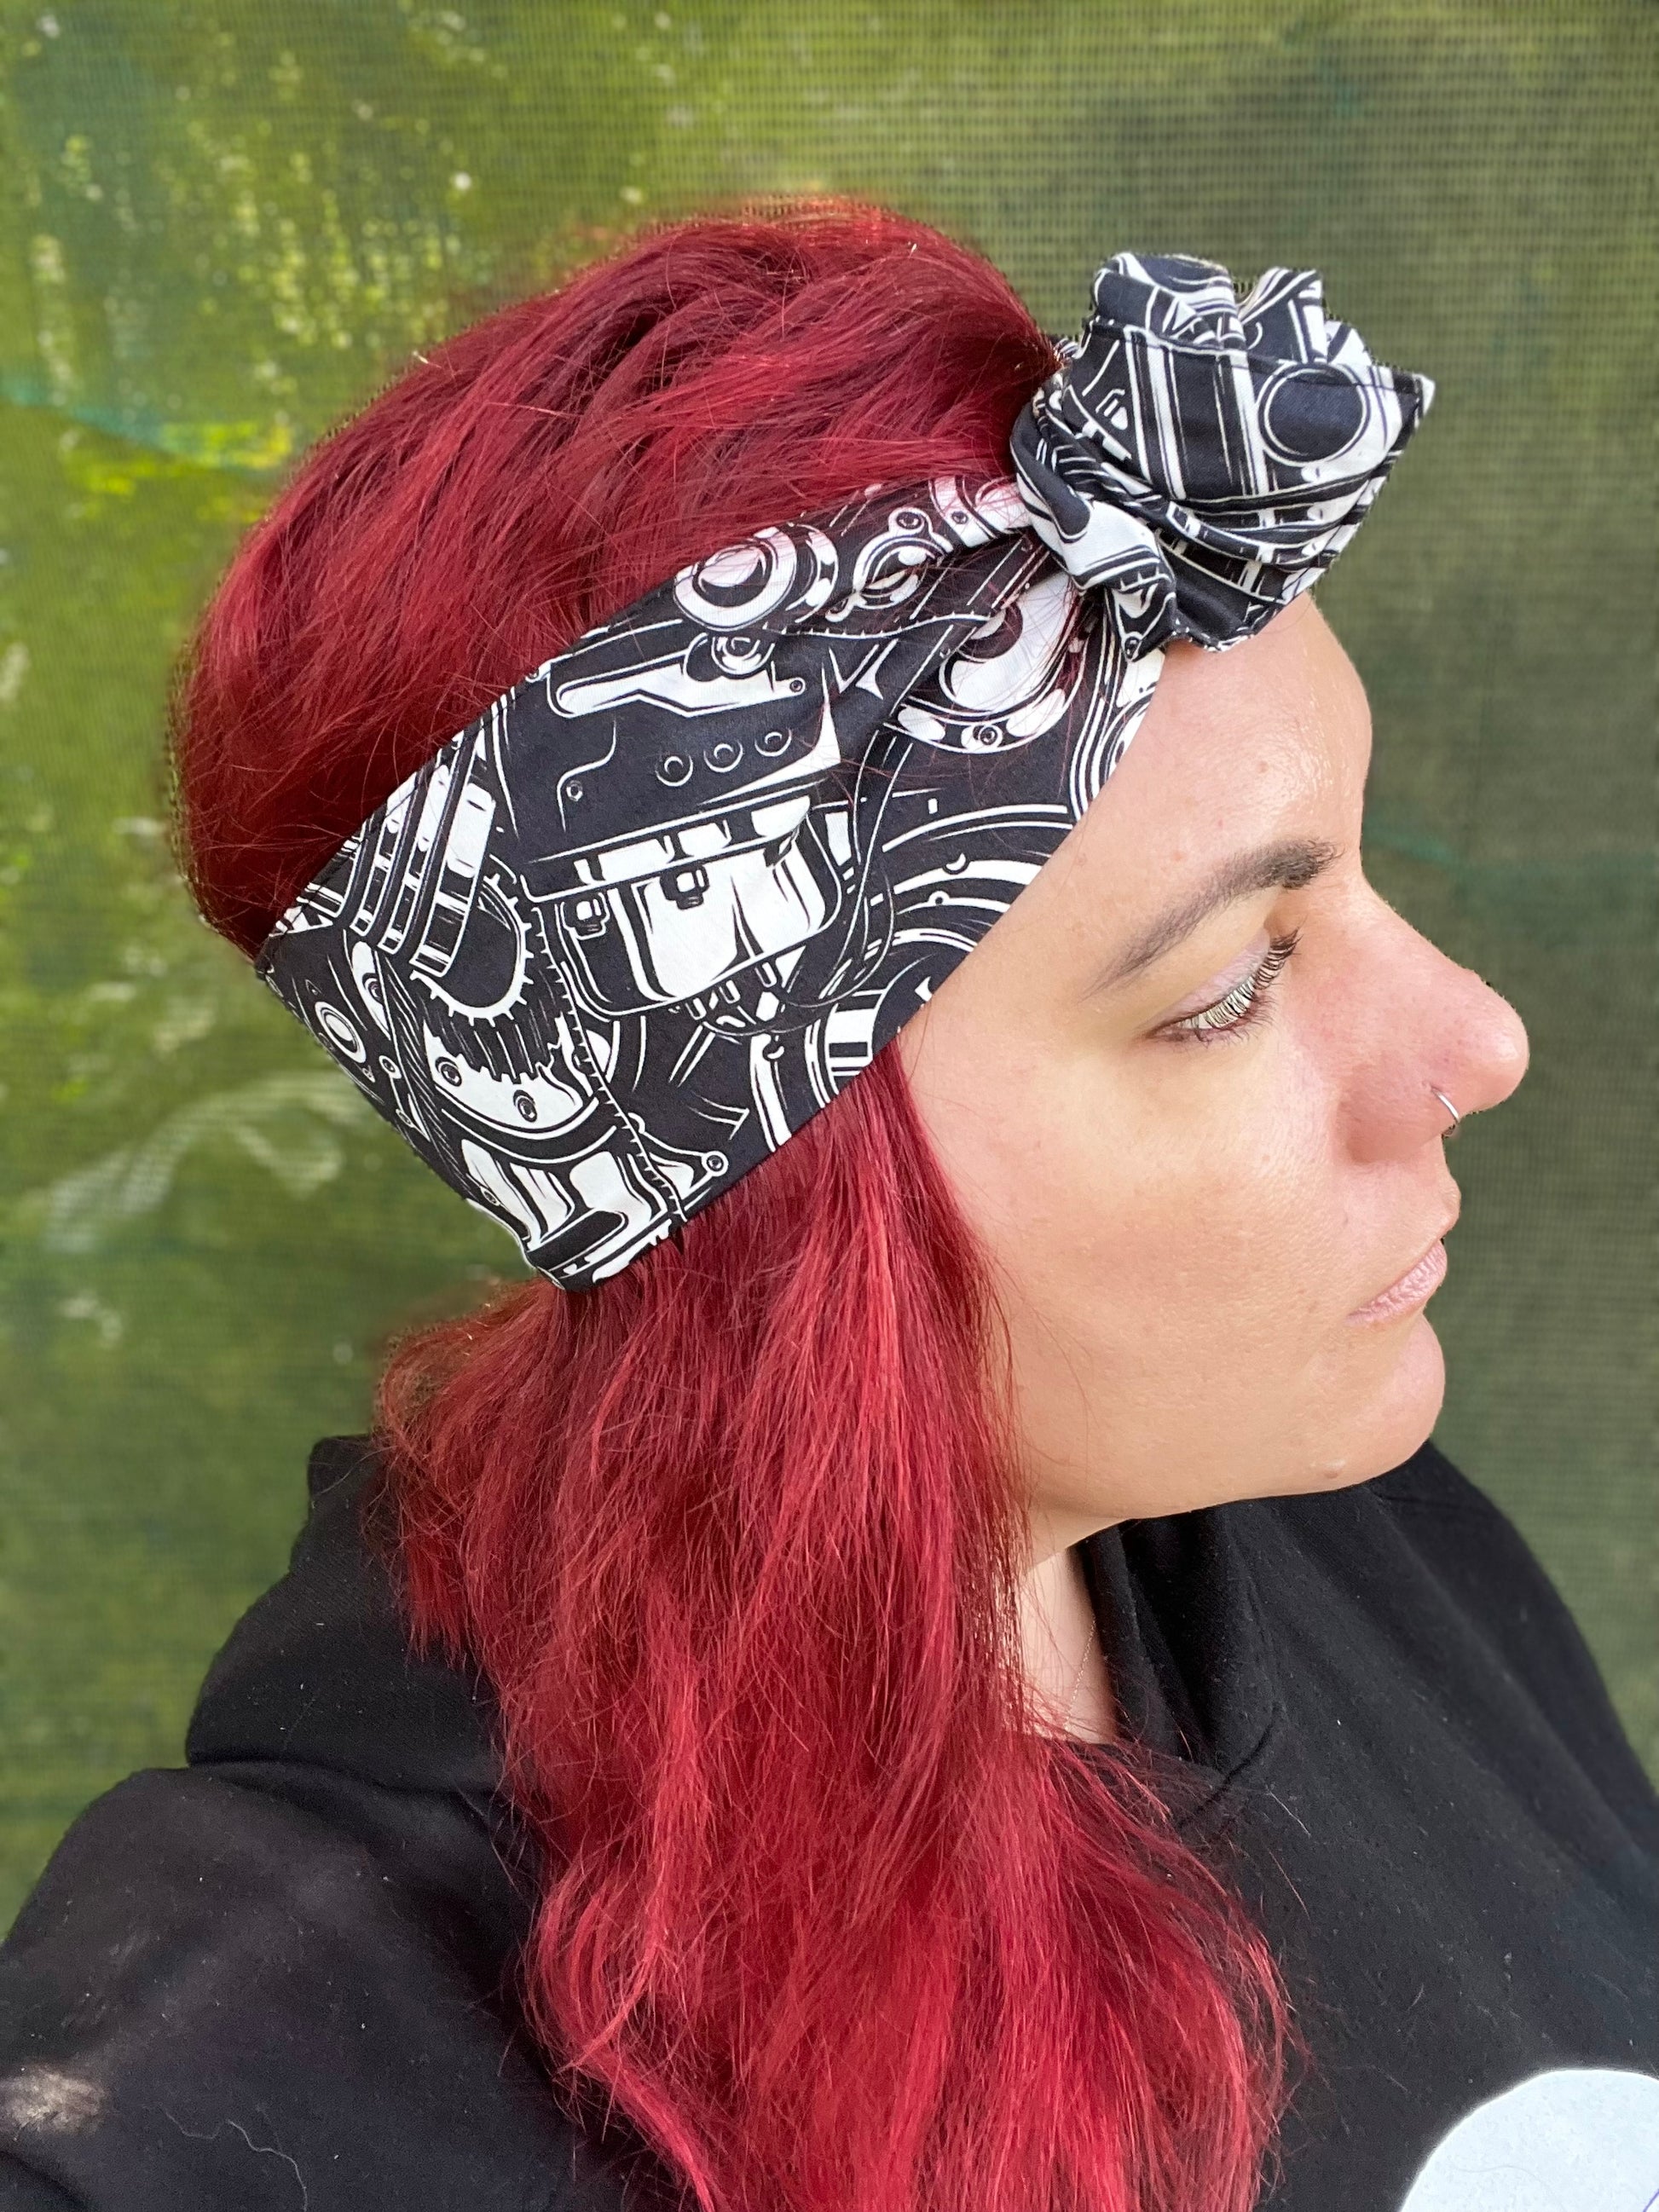 Brock Boho Wire Headband - Bae Bands Australia Twist Bow Wire Headband allows for your headband to stay in place all day with no headaches,